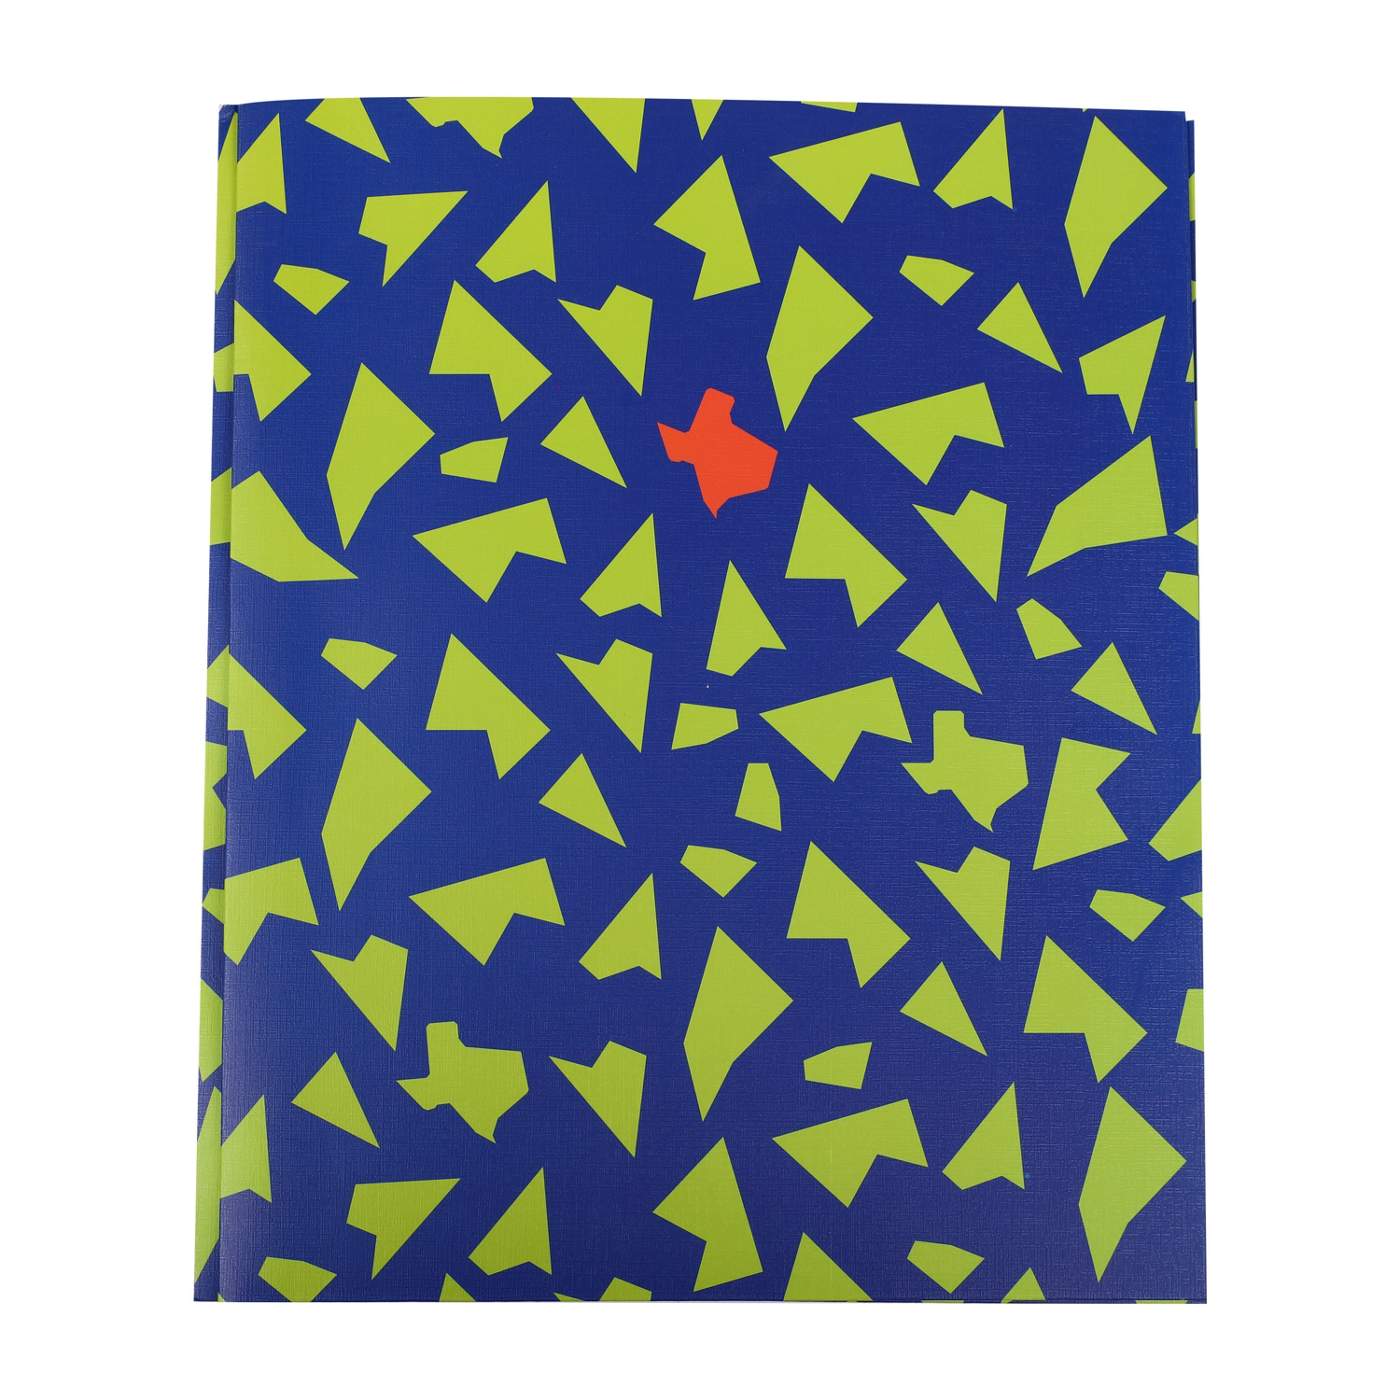 Destination Holiday Texas Pocket Paper Folder with Prongs - Blue; image 1 of 4